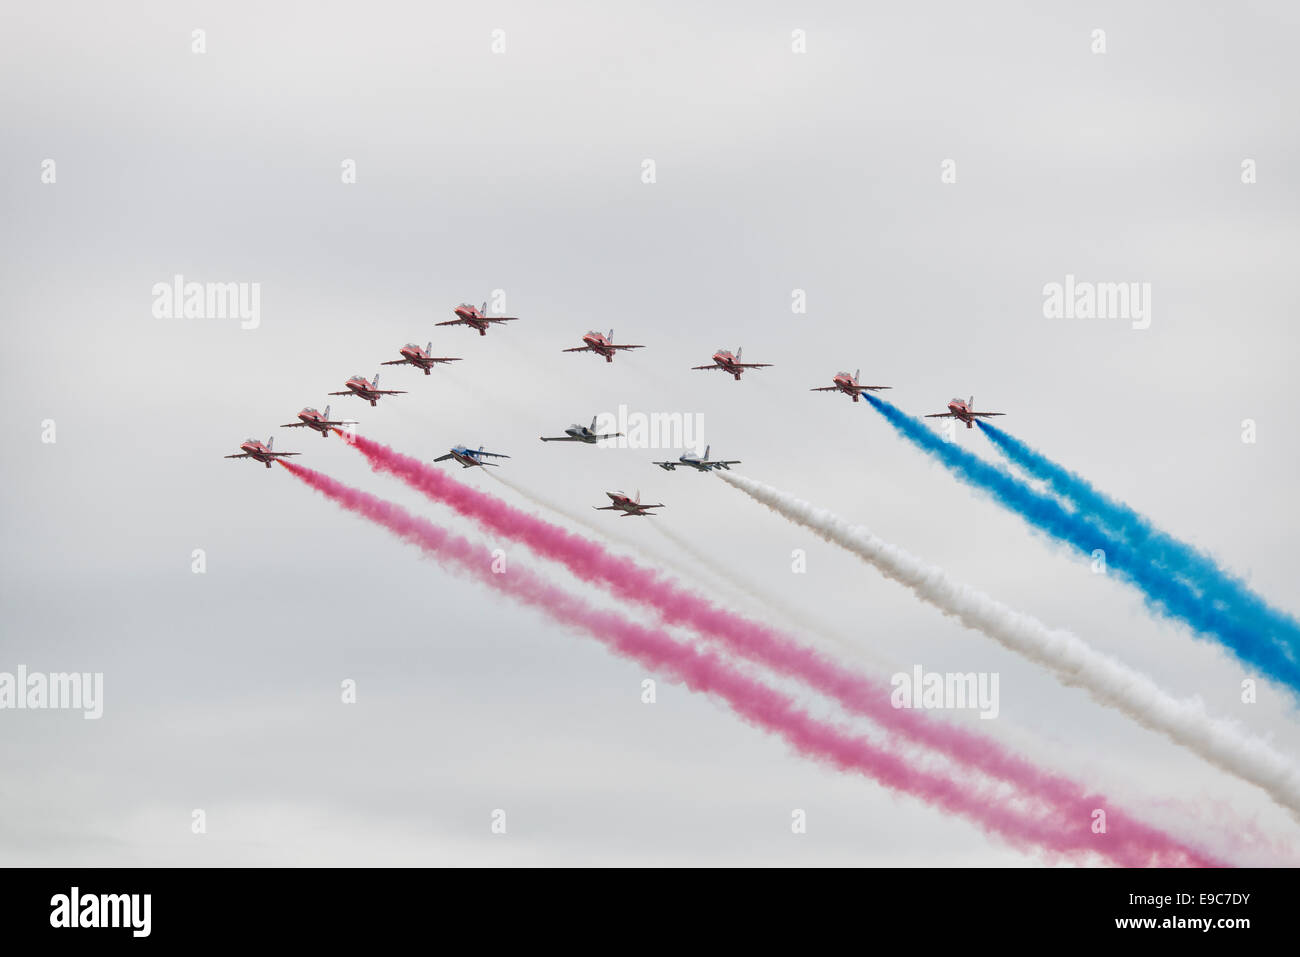 The British Royal Air Force Red Arrows Military Aerobatic Display Team celebrate their fiftieth display season at the RIAT Stock Photo